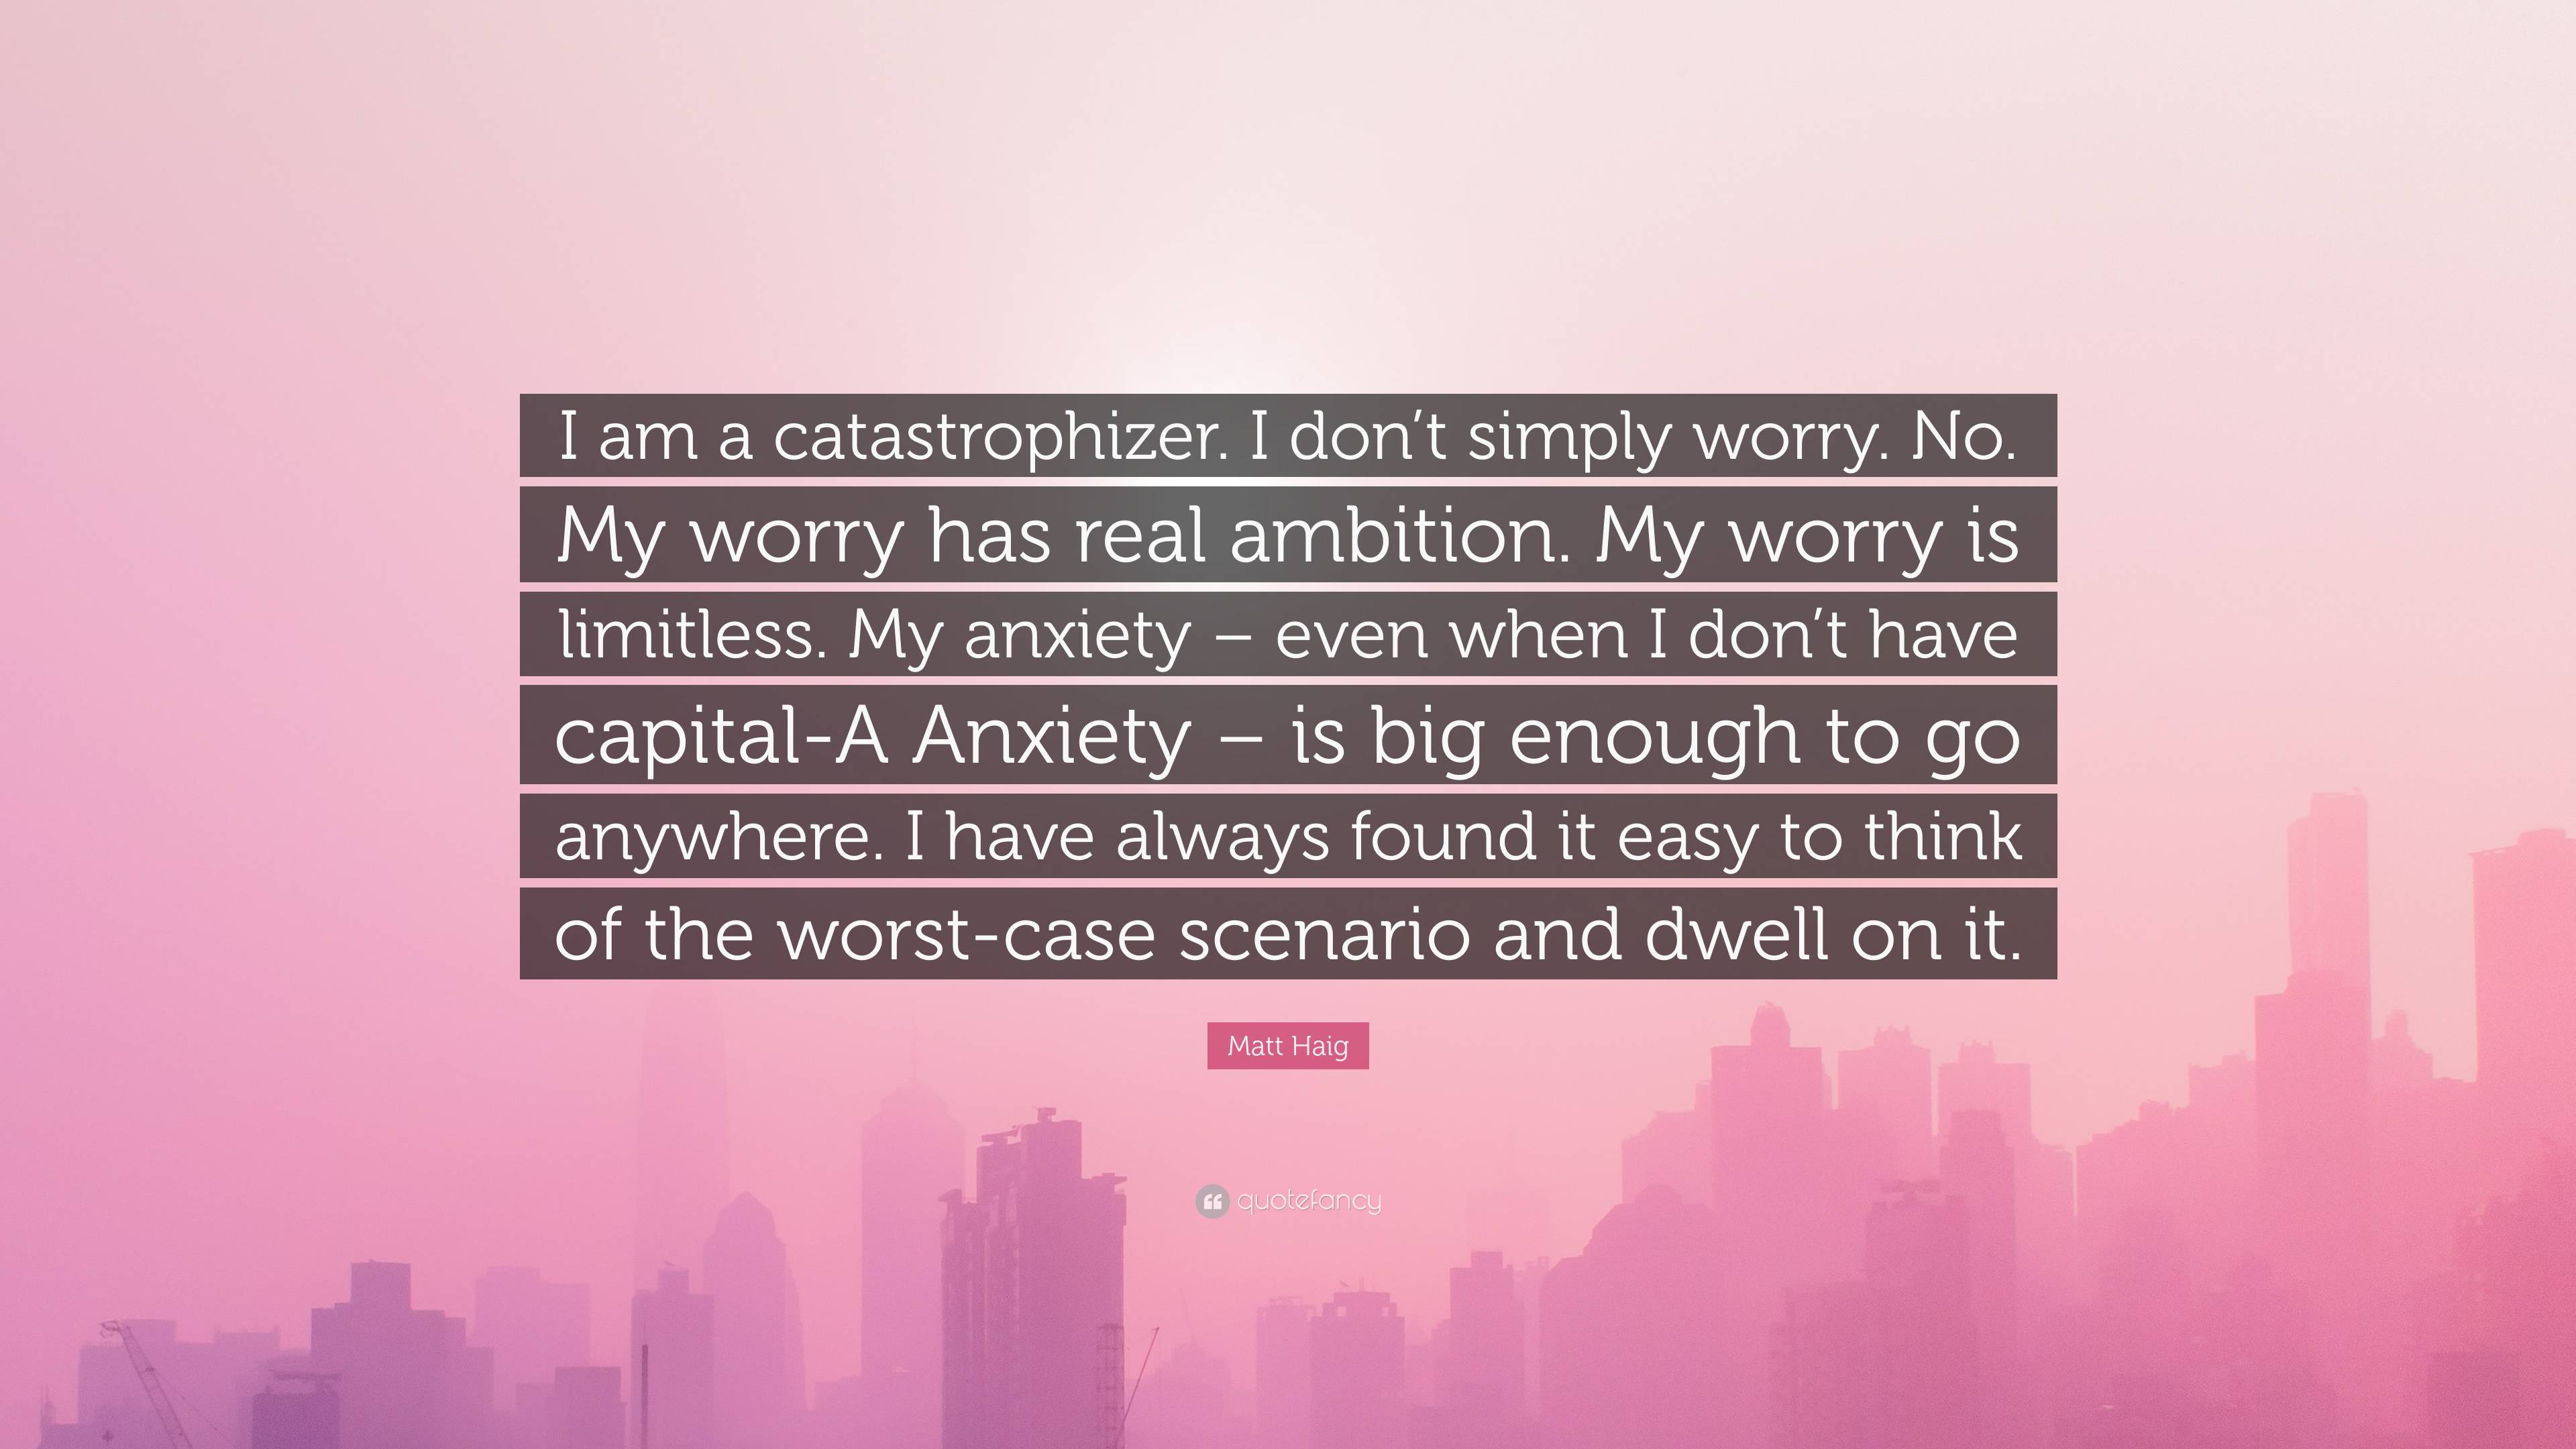 Matt Haig Quote: “I am a catastrophizer. I don't simply worry. No. My worry  has real ambition. My worry is limitless. My anxiety – even wh...”